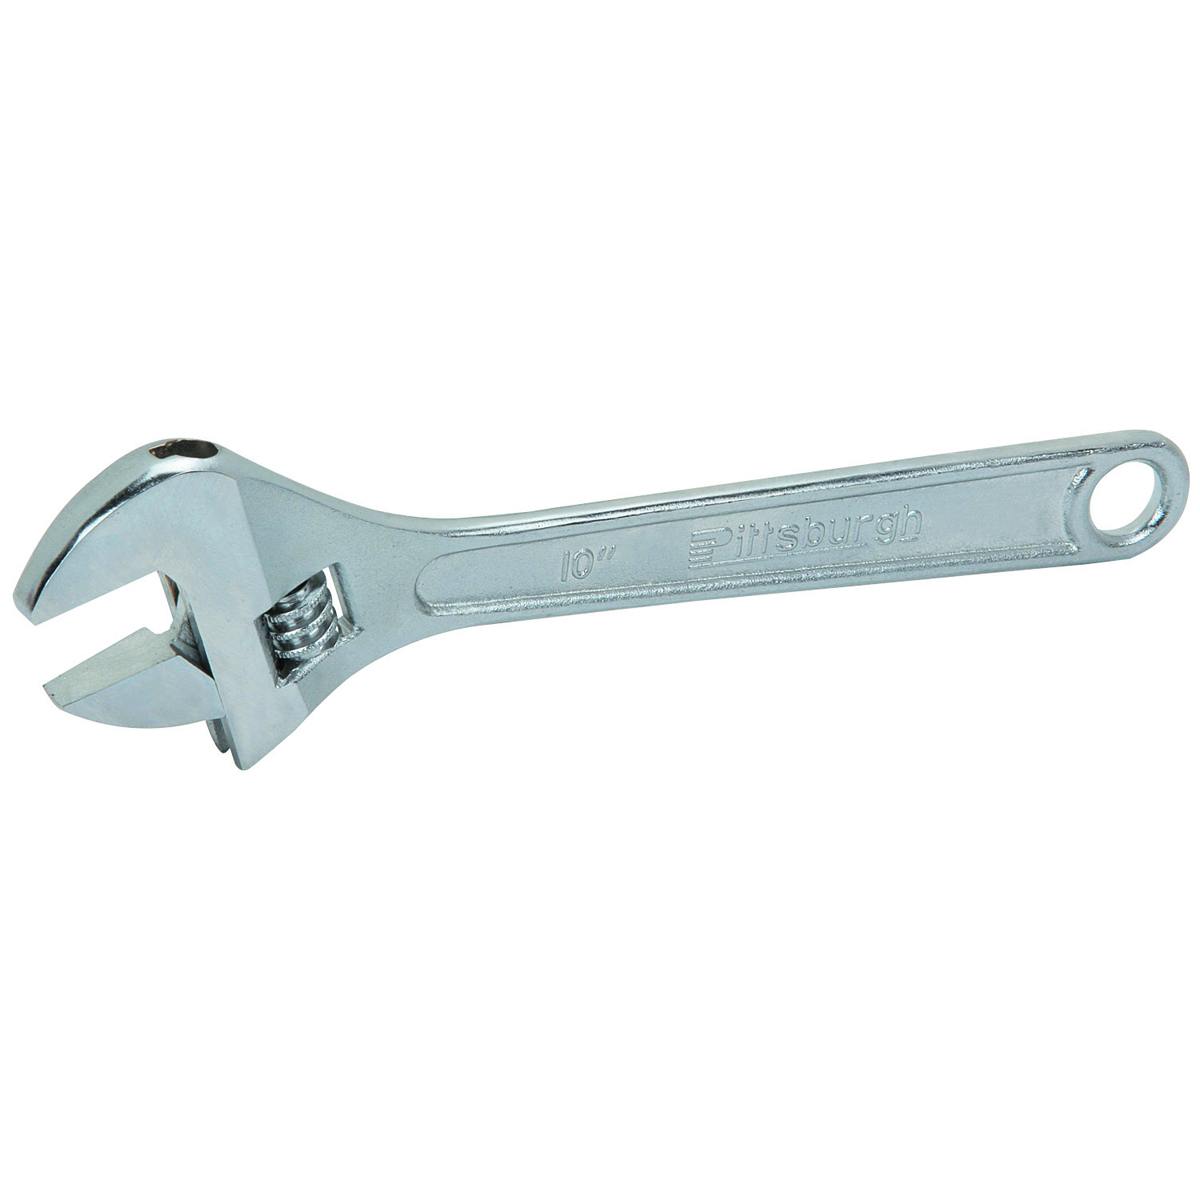 PITTSBURGH 10 in. Steel Adjustable Wrench - Item 65801 / 60697 / 63718 / 69554